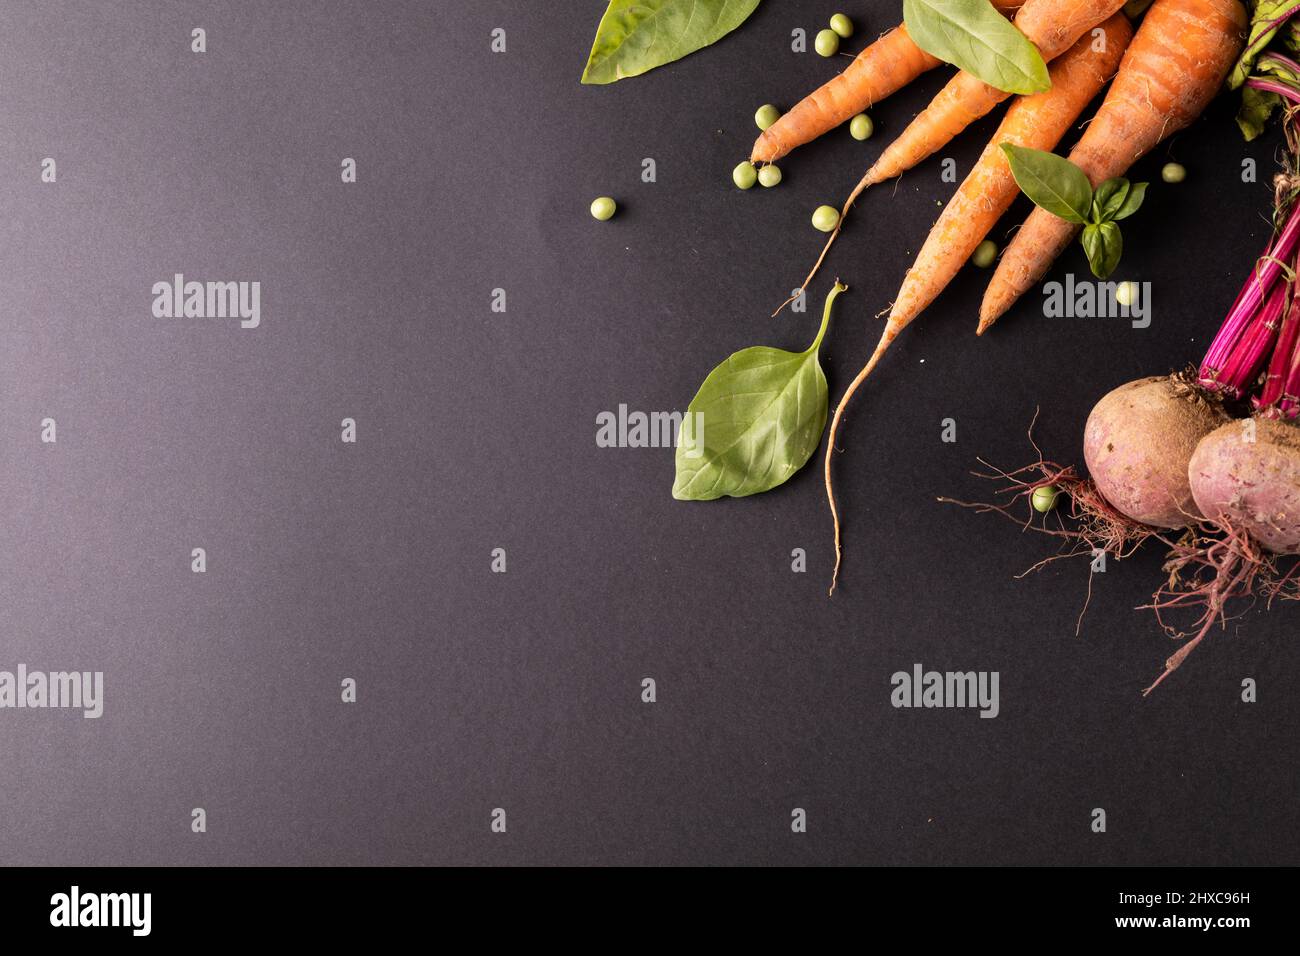 High angle view of carrots and beetroots with green peas and leaf vegetable on black background Stock Photo